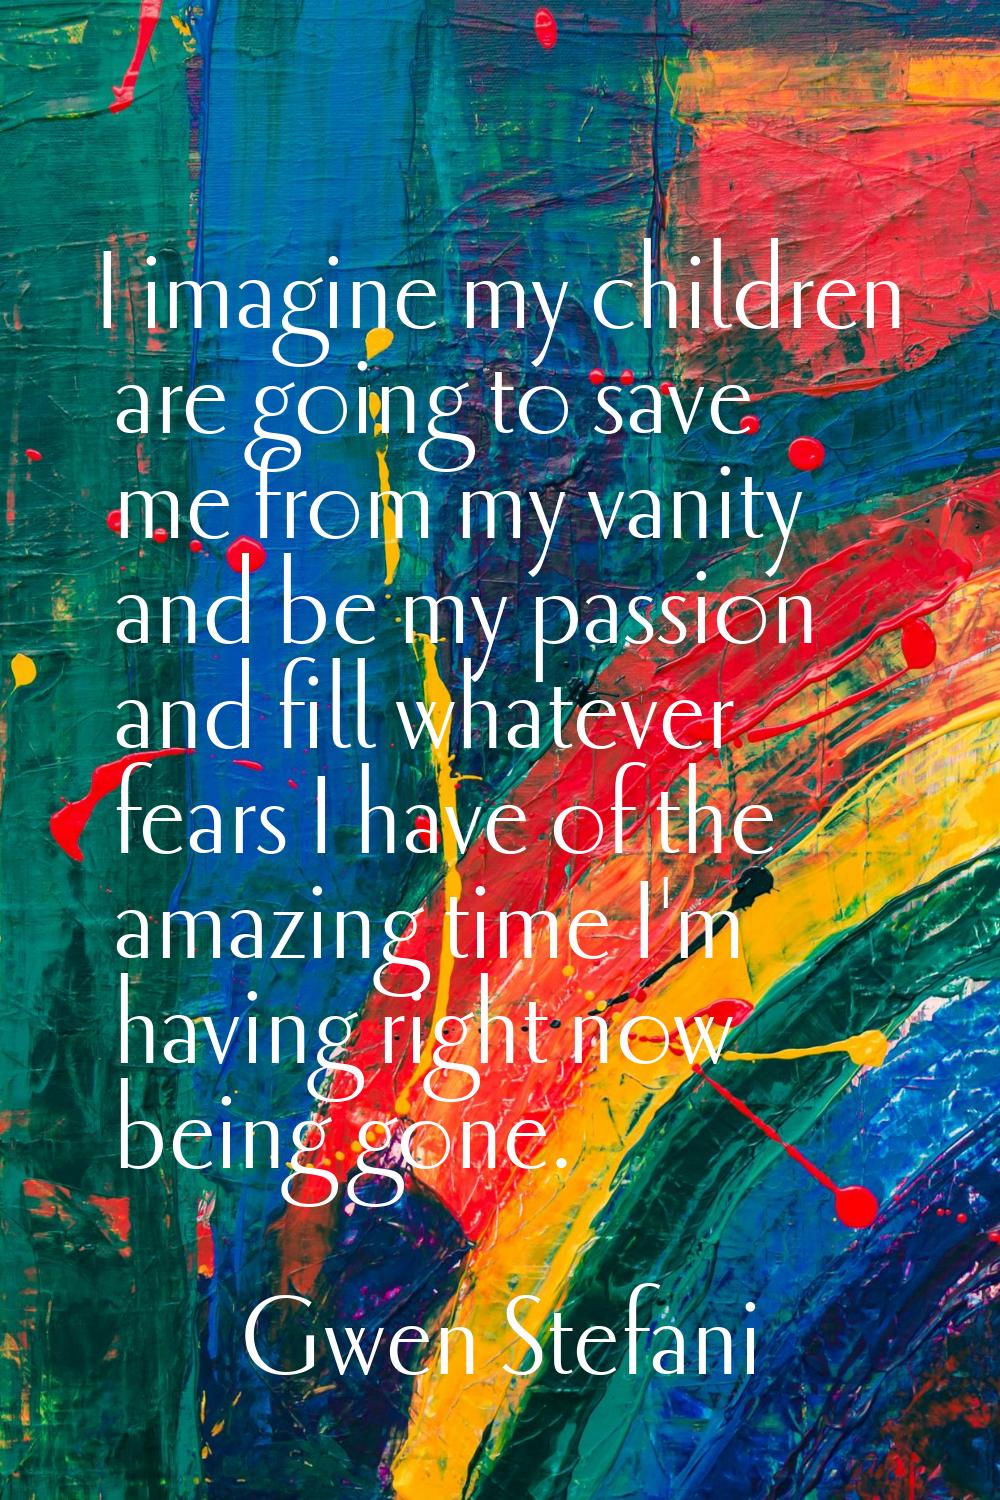 I imagine my children are going to save me from my vanity and be my passion and fill whatever fears